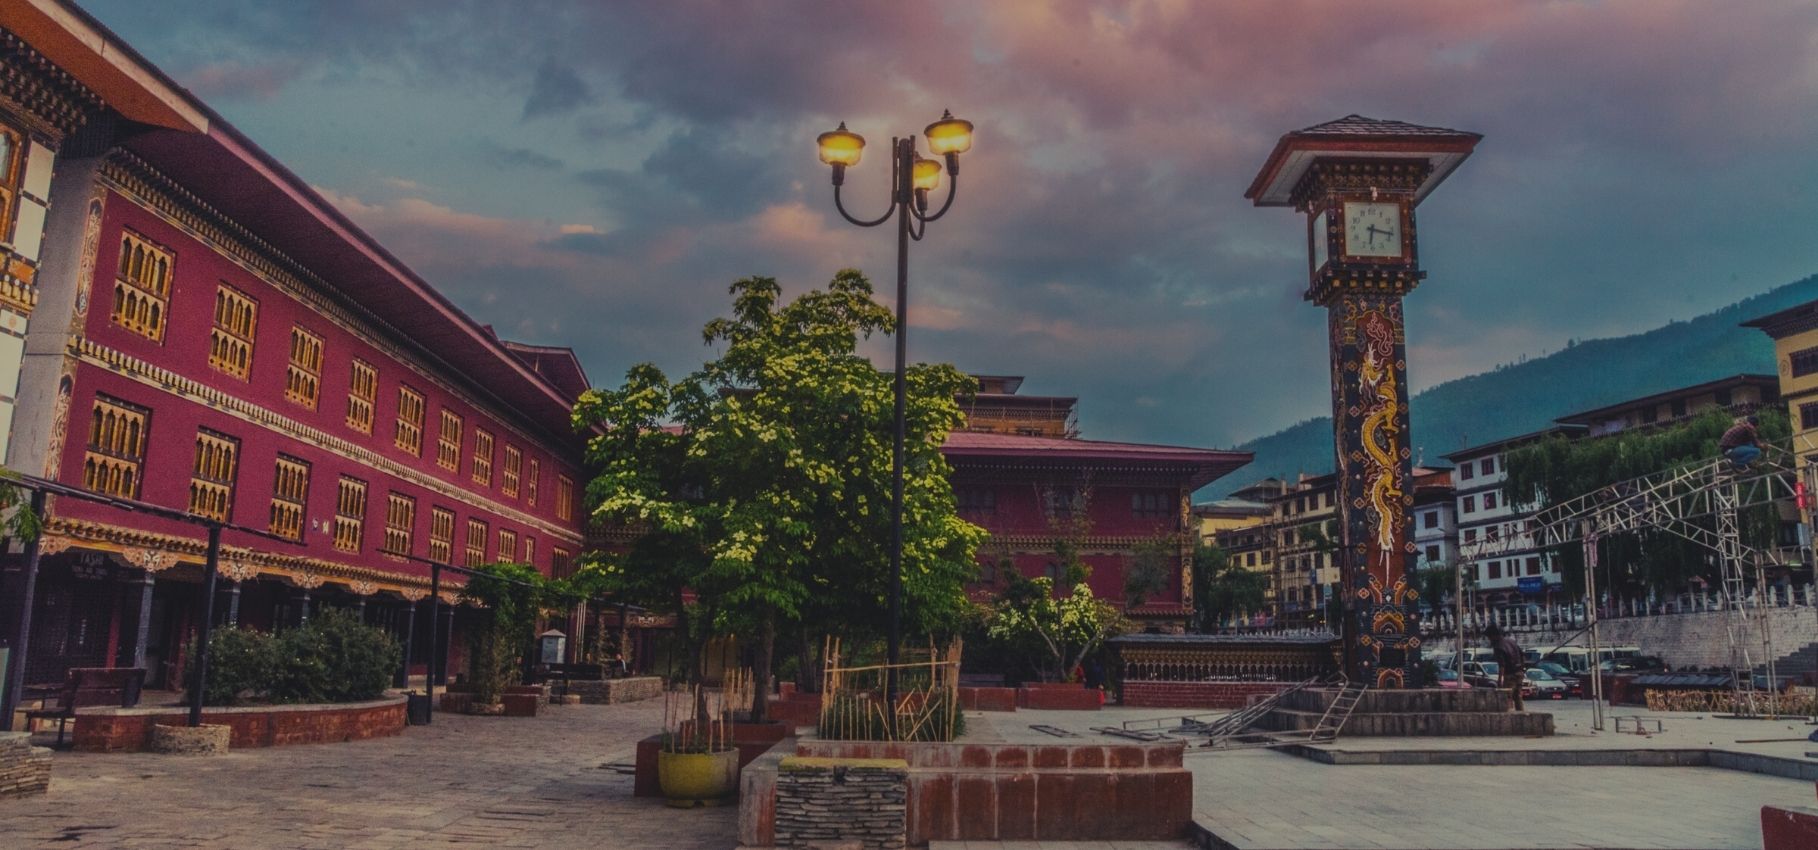 The Best Things to do in Thimphu, Bhutan